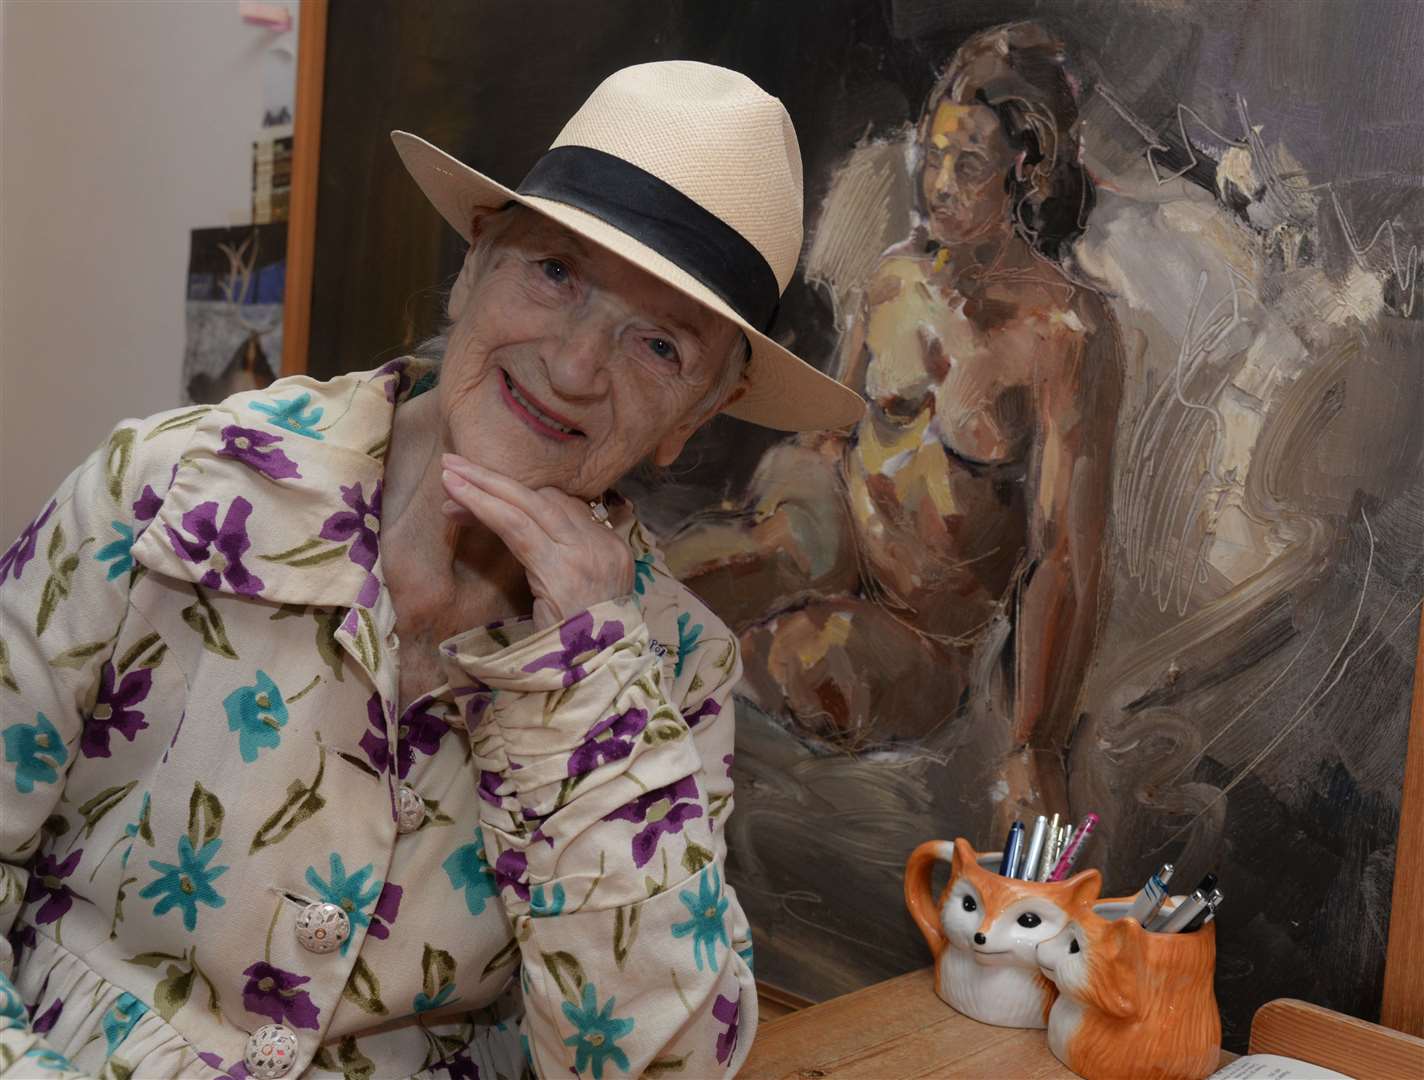 86-year old former artists model Yvonne Vinall of Tunbridge Wells who is donating her body to science